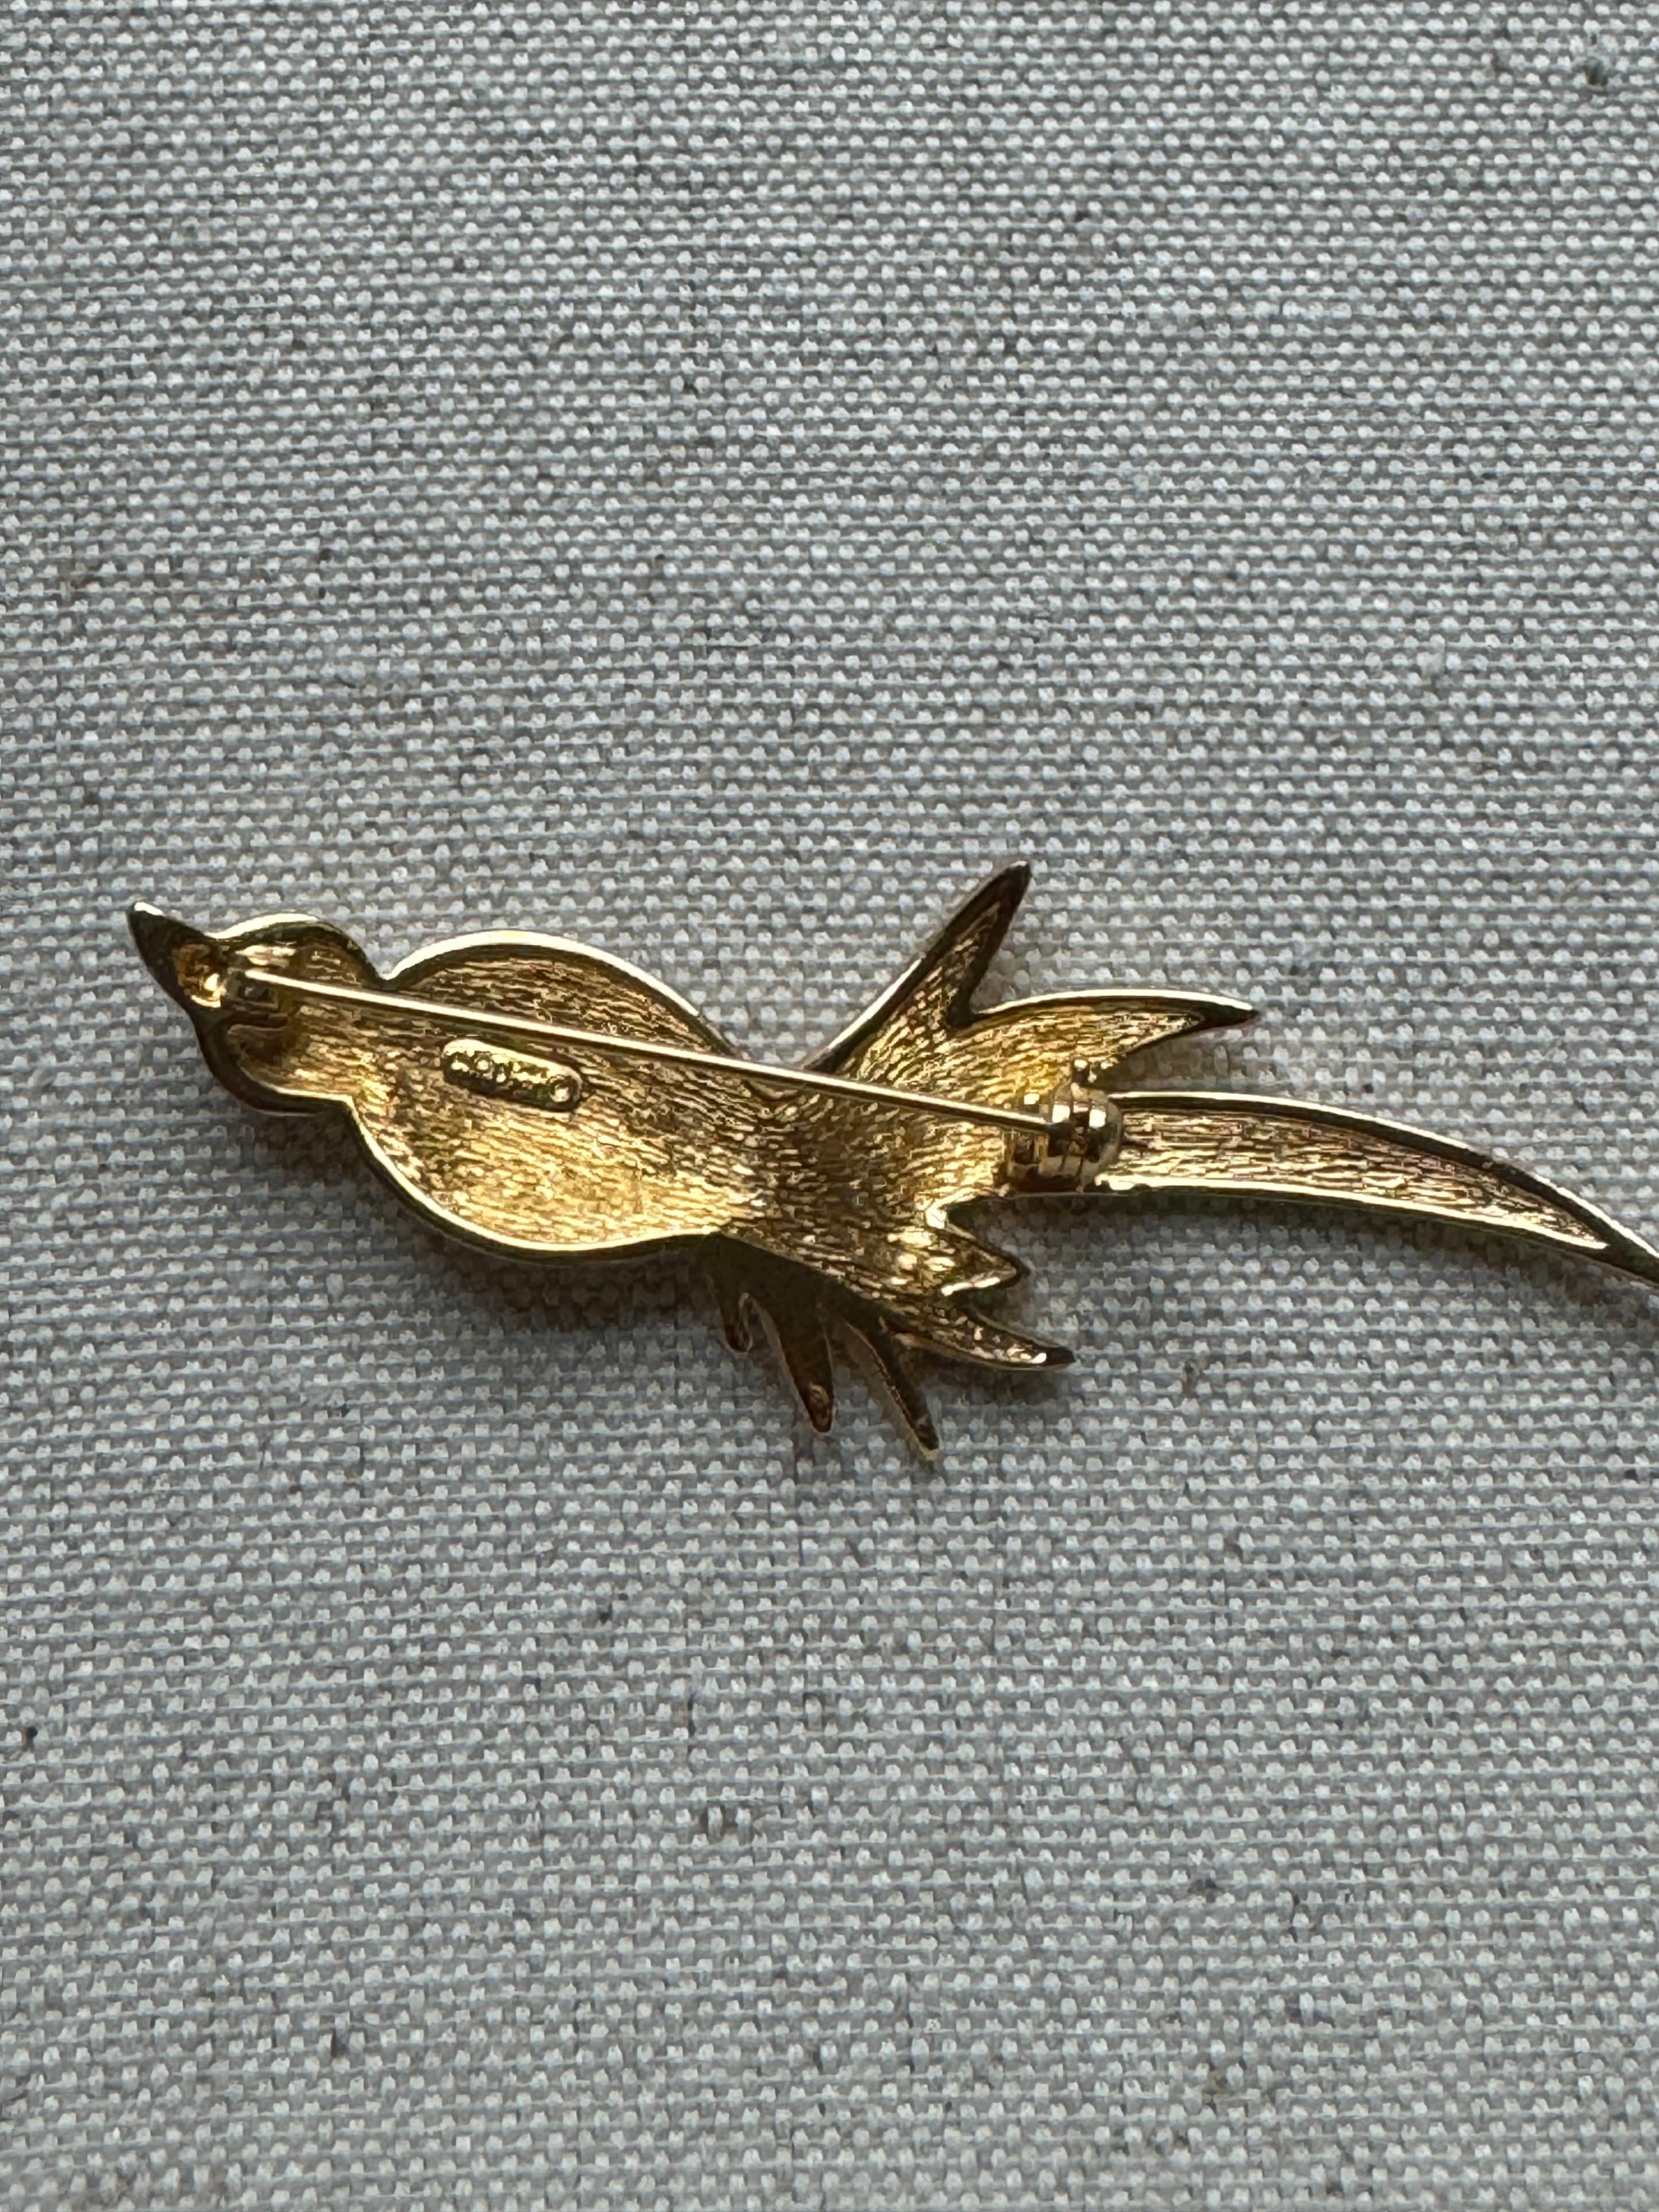 Beautiful vintage gold tone Christian Dior Bird Brooch.
Pin displays excellent condition. The head consists of 7 round crystals and the body of the bird consists of 25 crystals. The birds texture displays a combination of smooth and textured